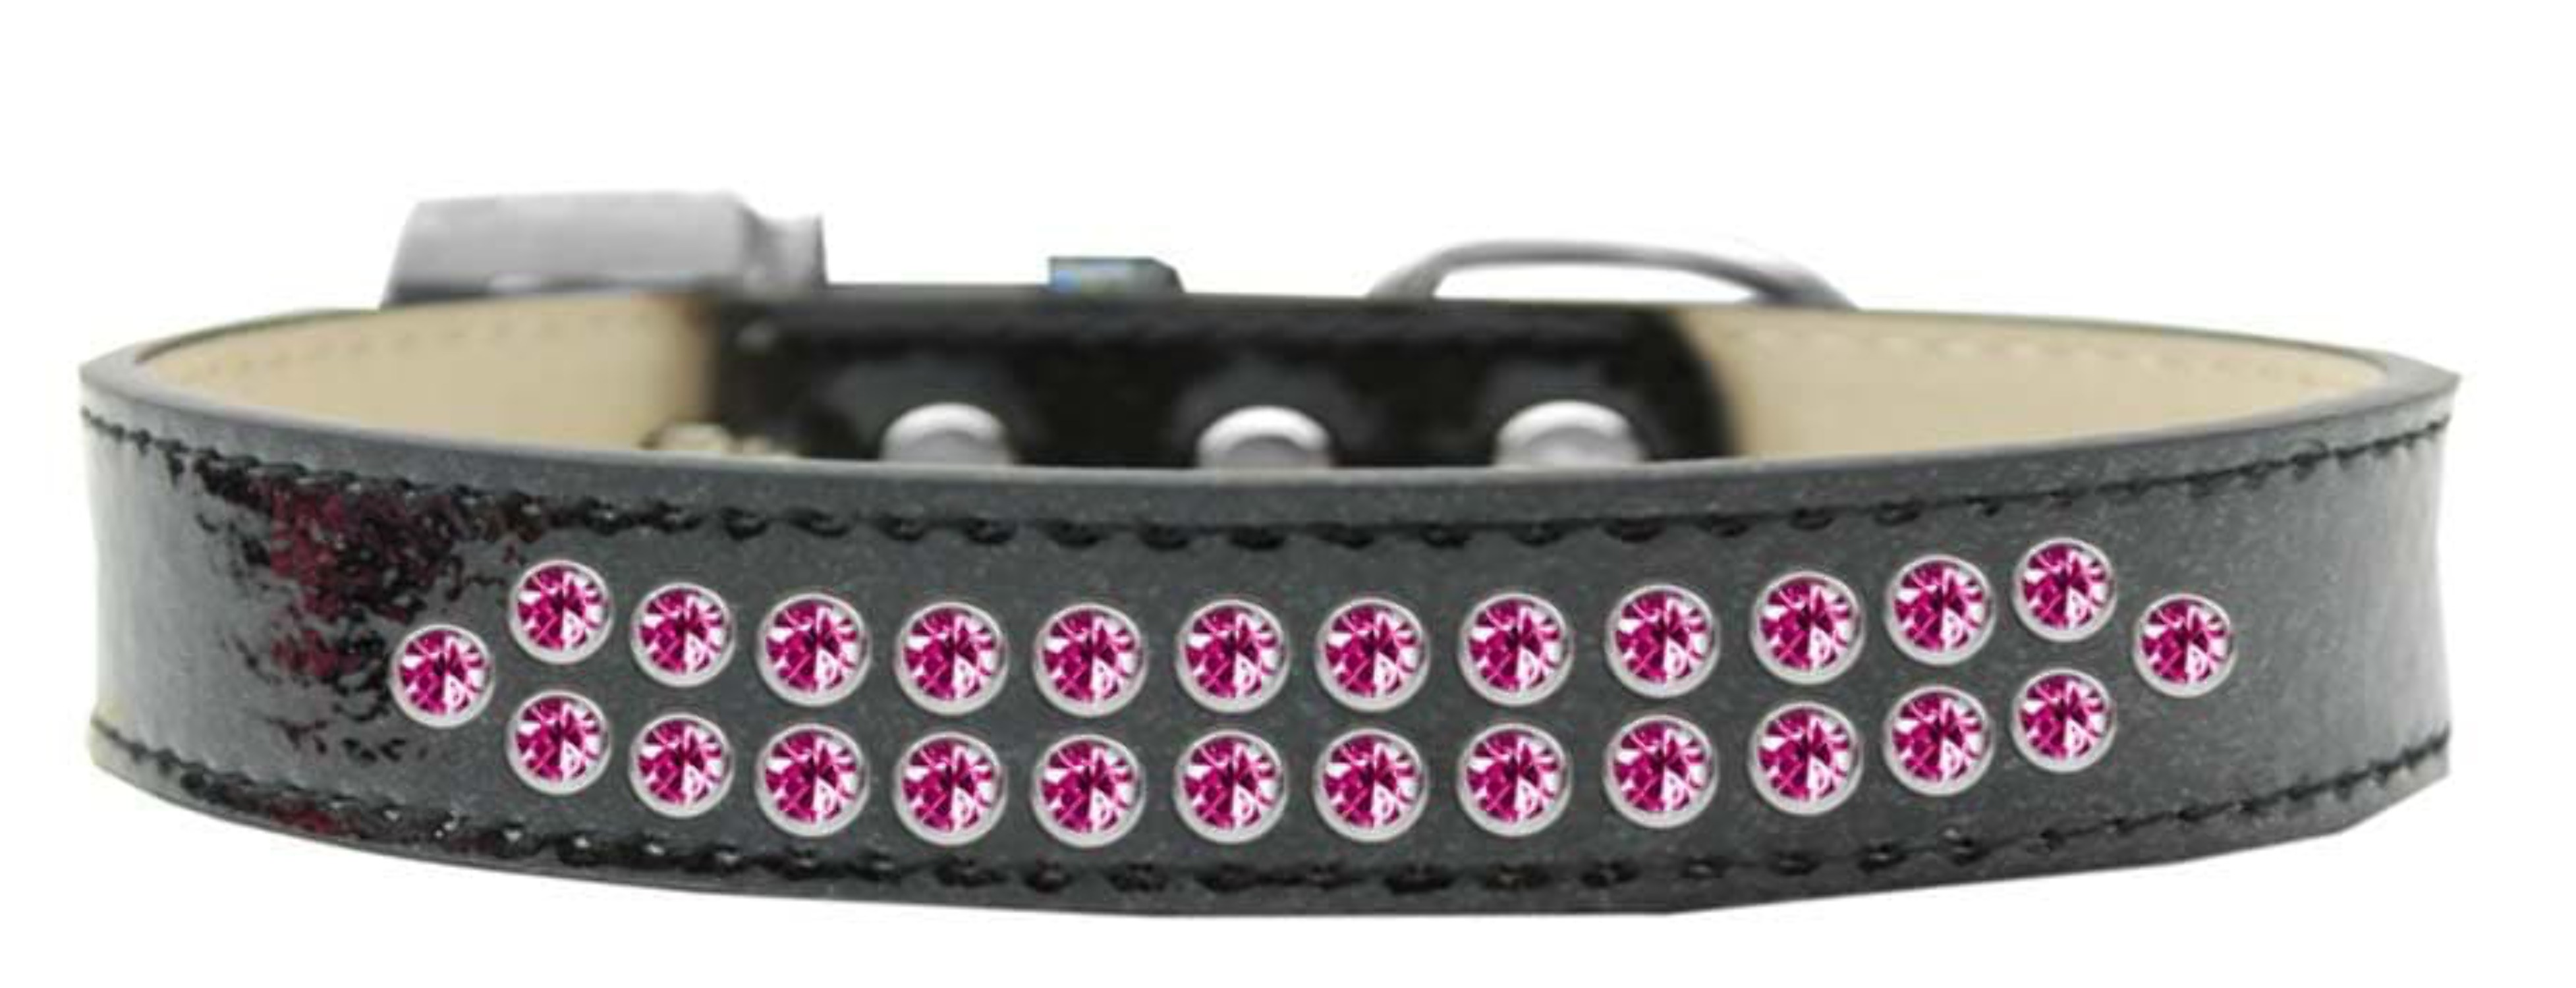 Mirage Pet Two Row Bright Pink Crystal Size 16 Emerald Green Ice Cream Dog Collar - image 5 of 5